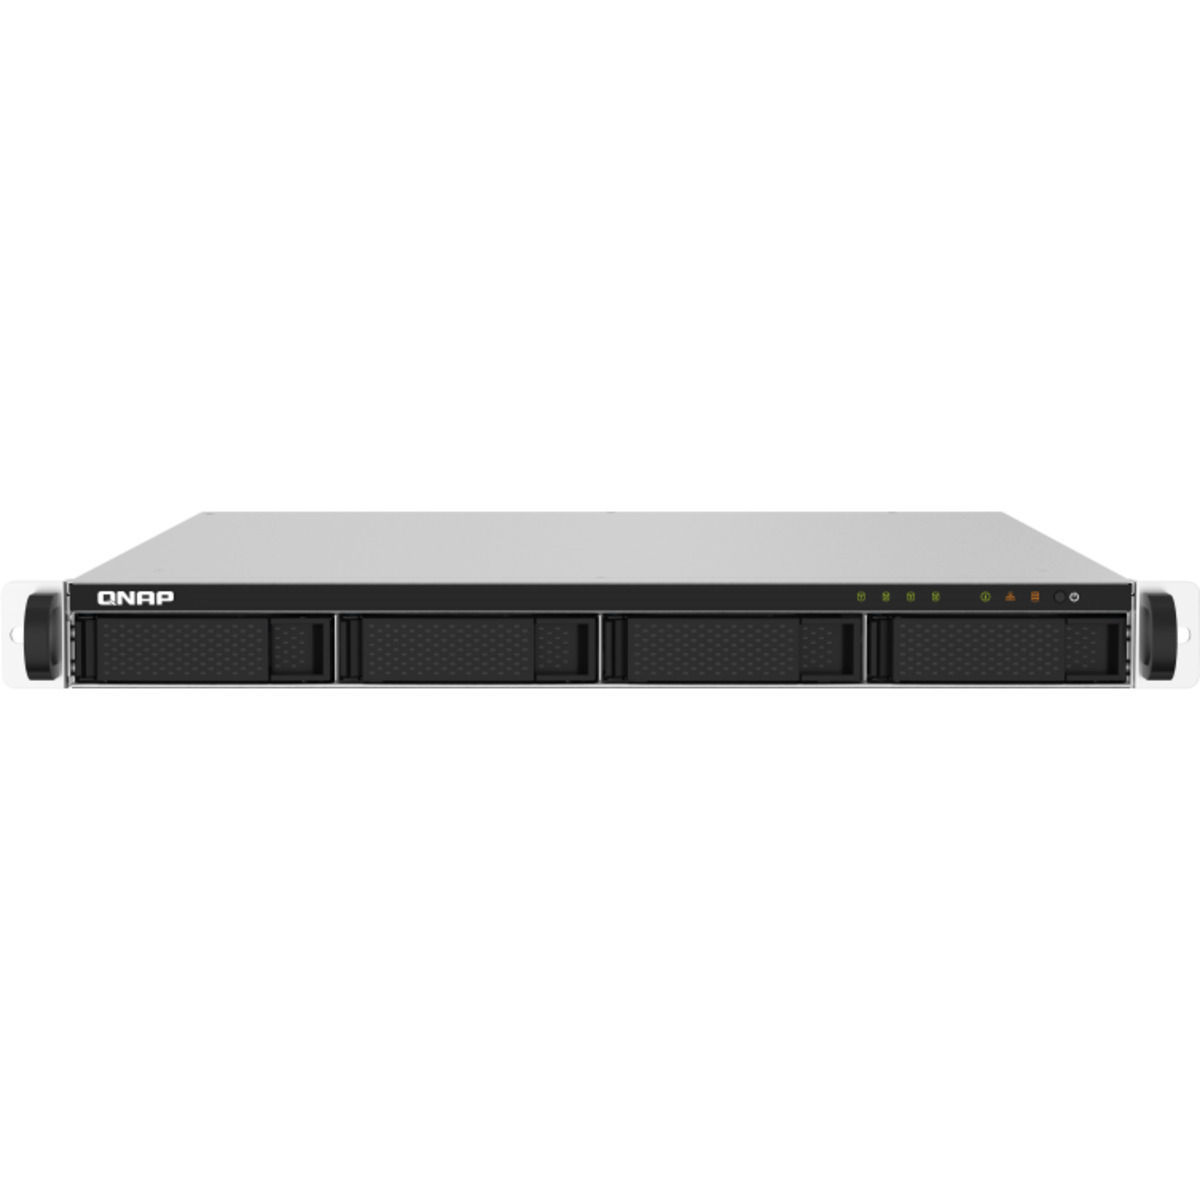 QNAP TS-432PXU-RP 2tb 4-Bay RackMount Personal / Basic Home / Small Office NAS - Network Attached Storage Device 2x1tb Sandisk Ultra 3D SDSSDH3-1T00 2.5 560/520MB/s SATA 6Gb/s SSD CONSUMER Class Drives Installed - Burn-In Tested - FREE RAM UPGRADE TS-432PXU-RP